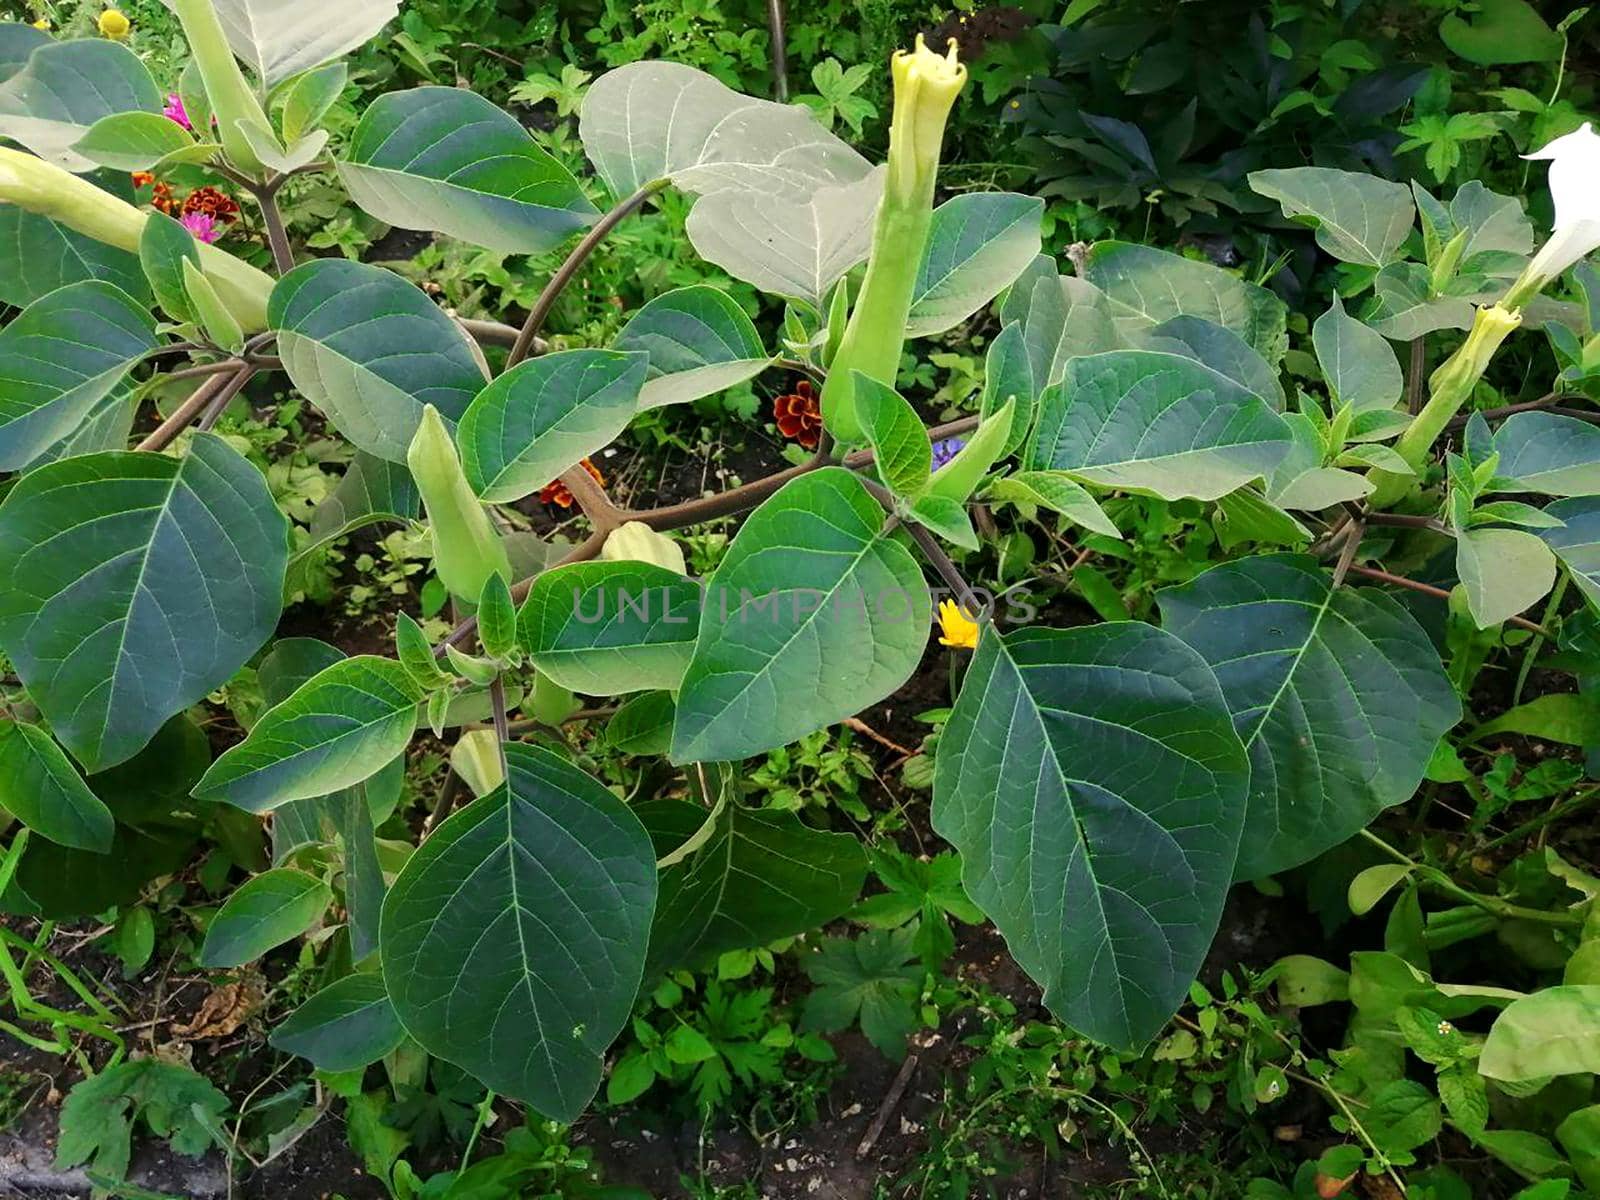 White Datura Candida Flowers with Green leaves